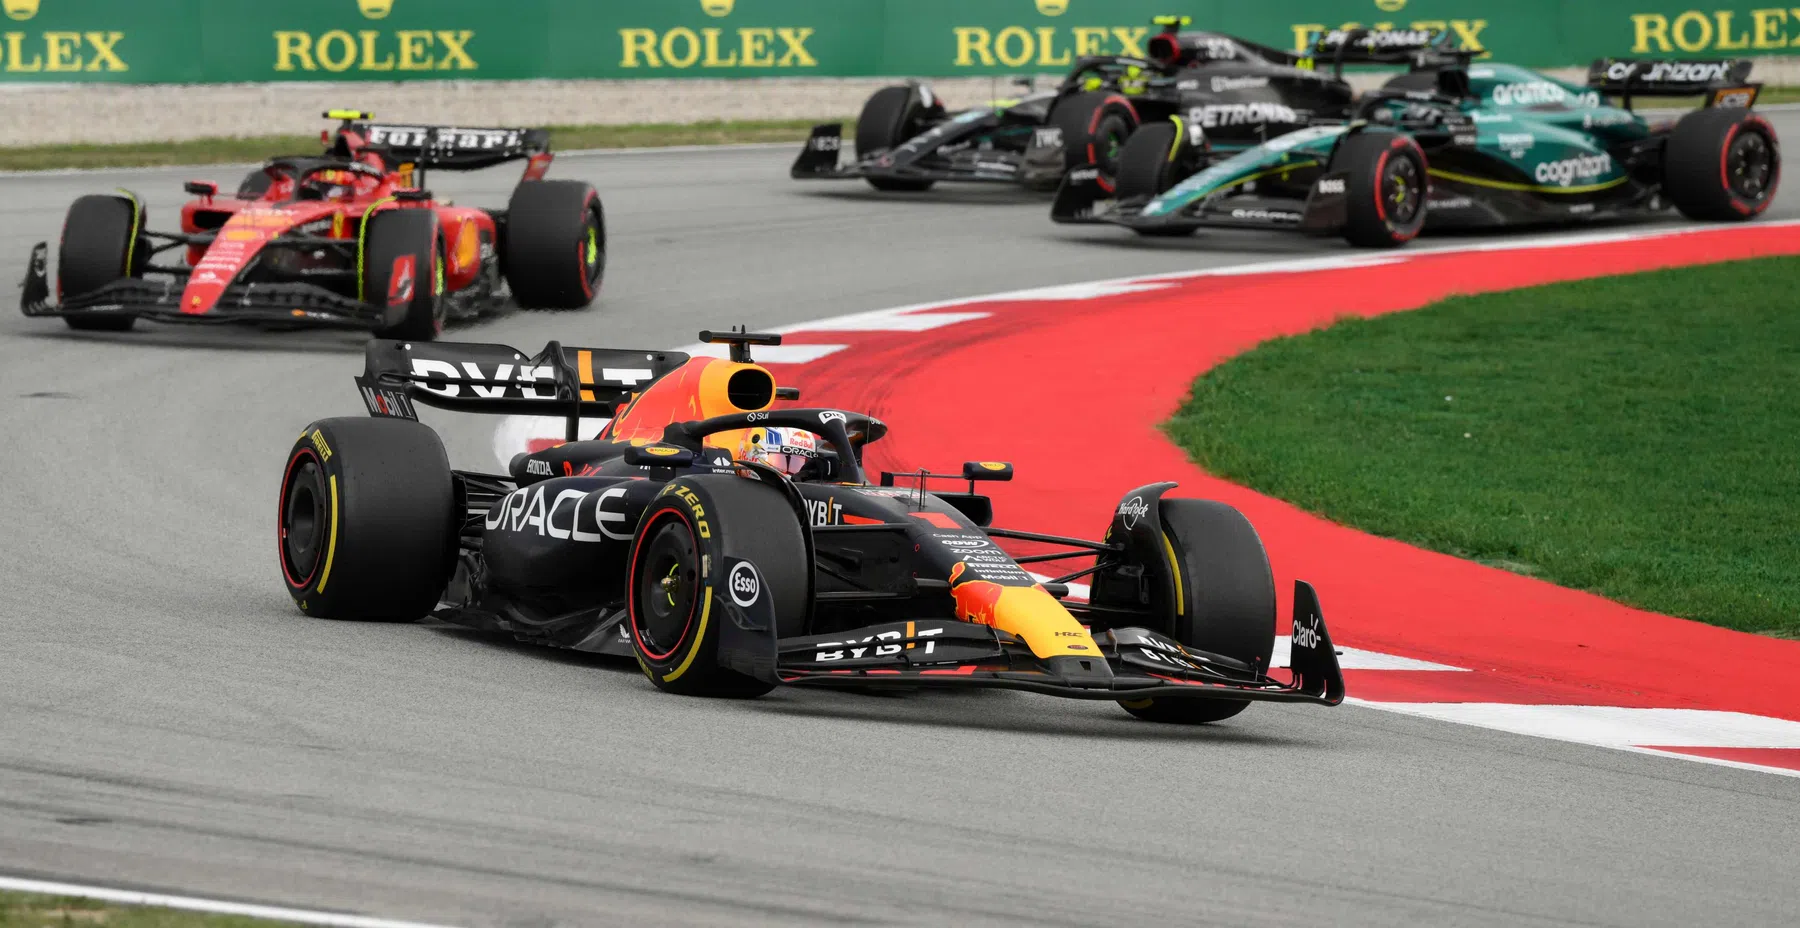 Red Bull Racing aim to fight back against Ferrari and McLaren in Spain